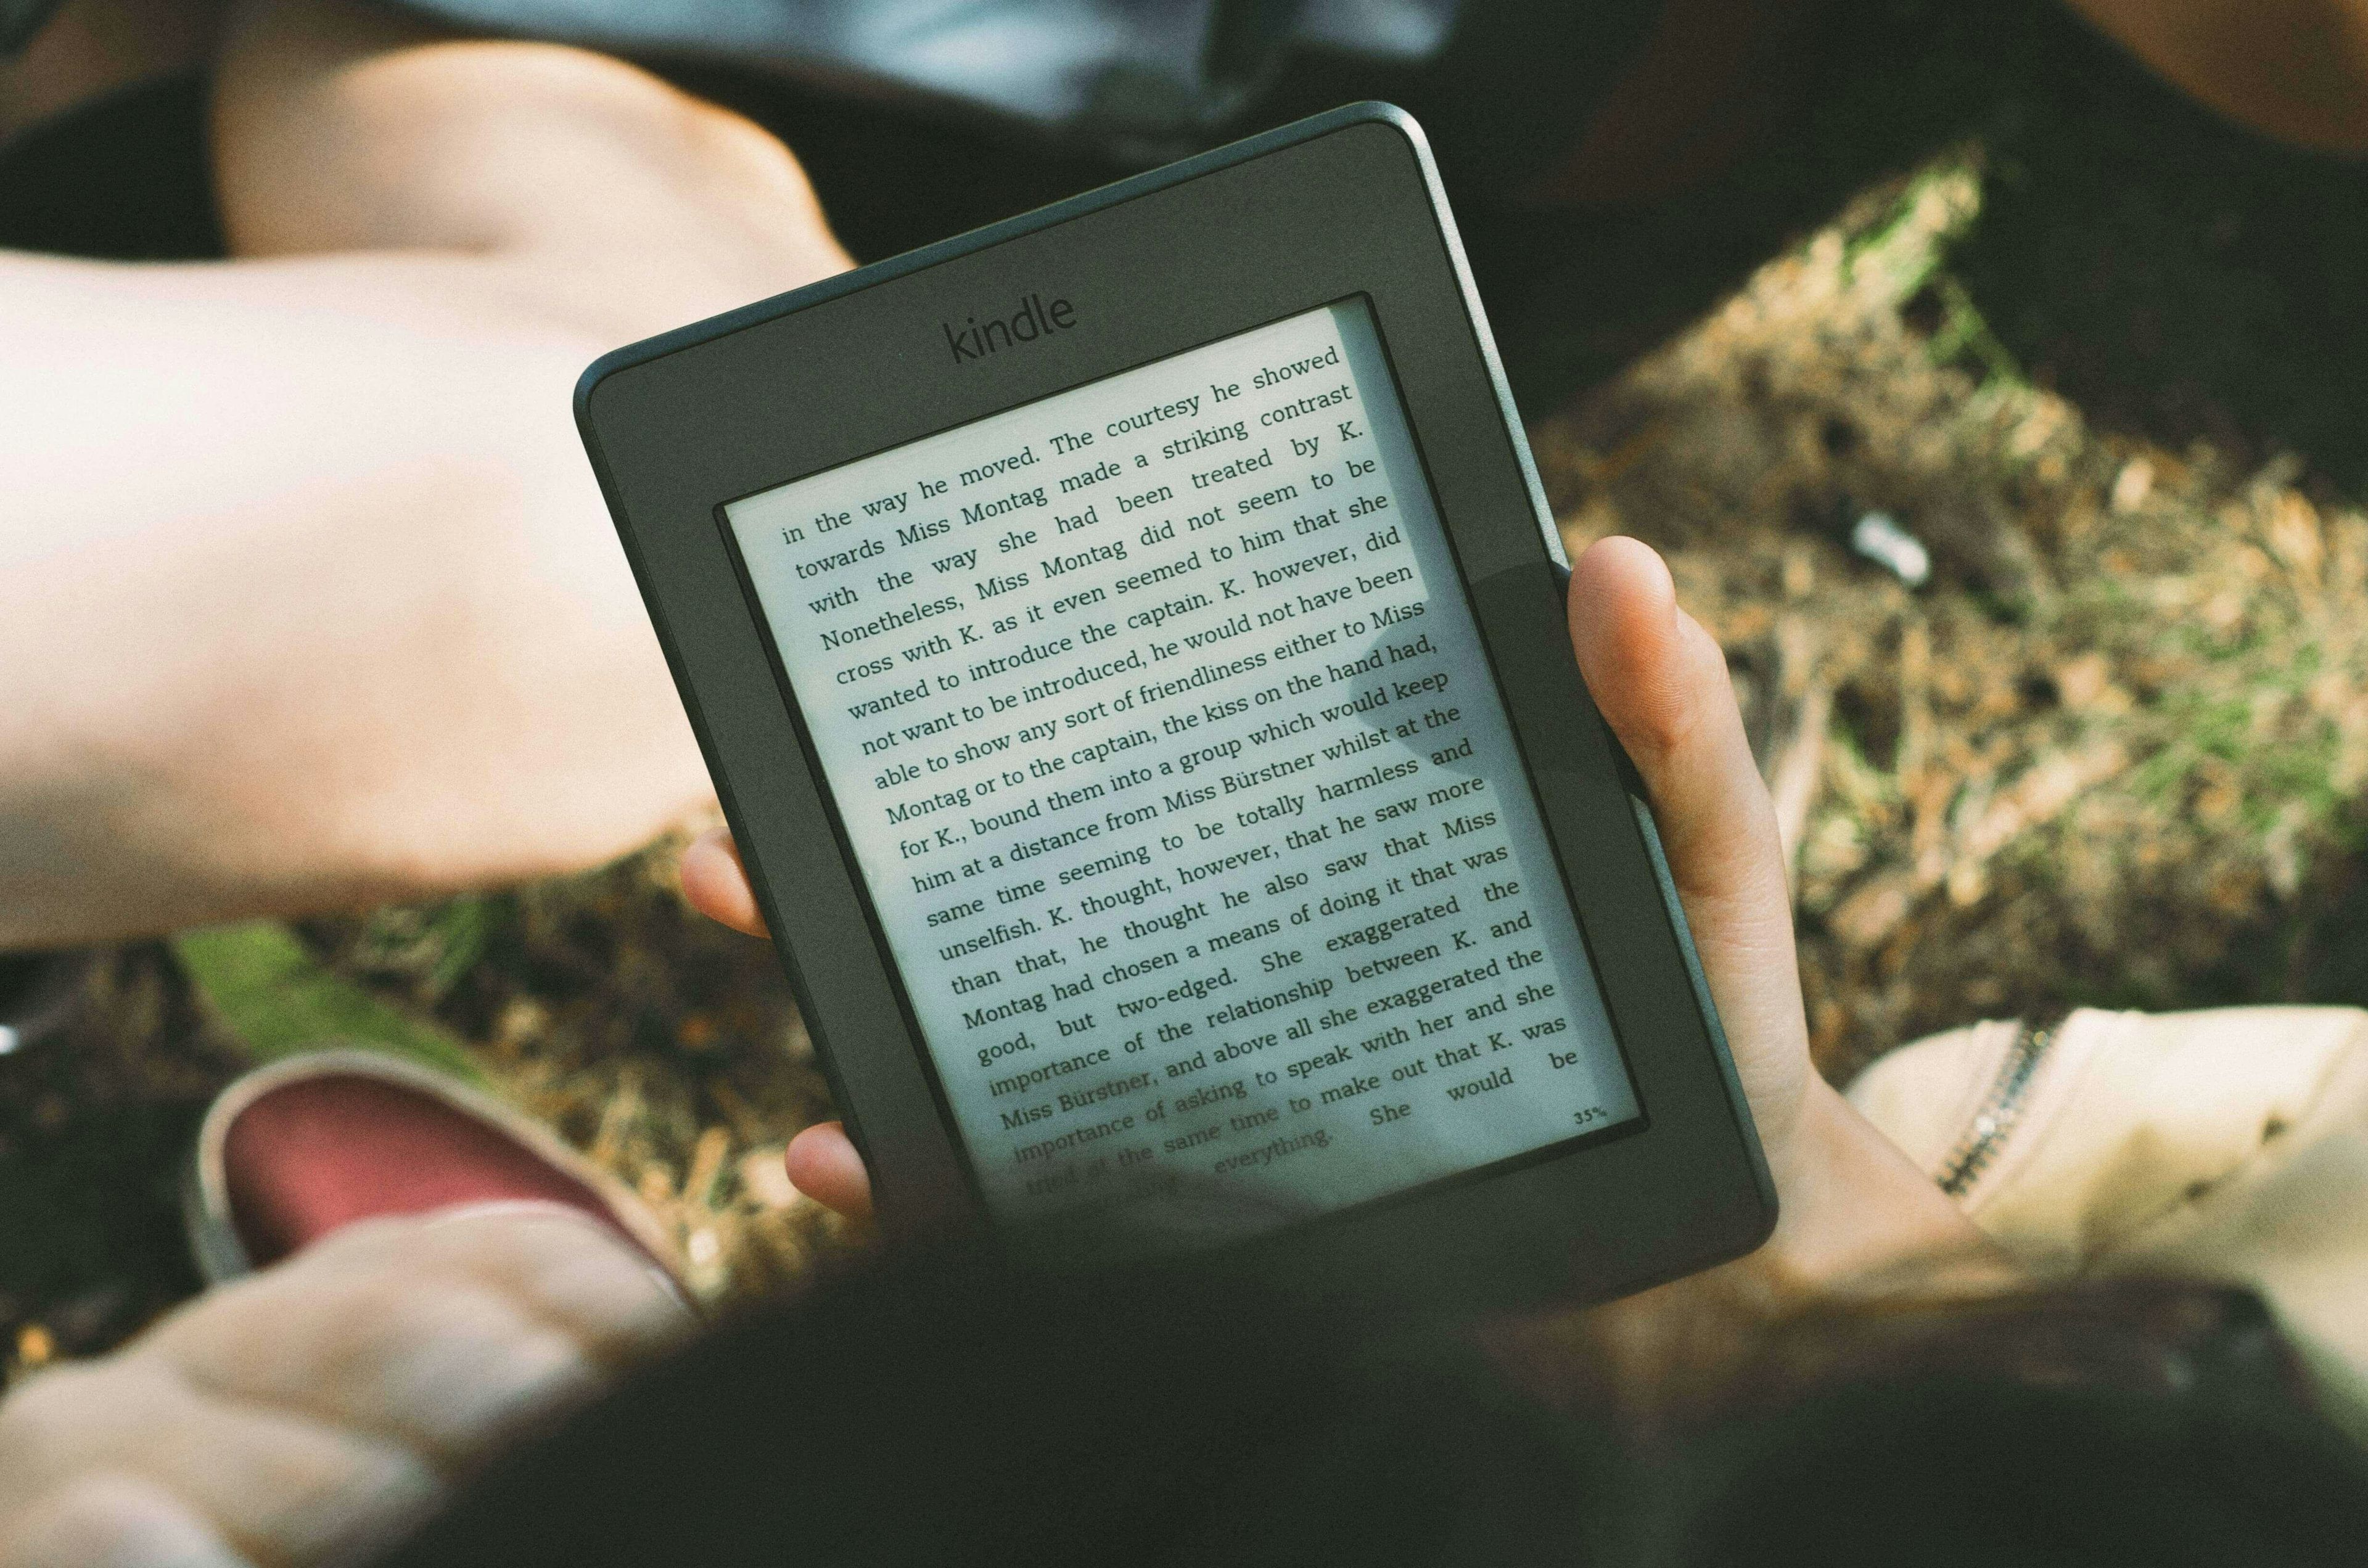 Amazon kindle being held by someone sitting on grass with friends.